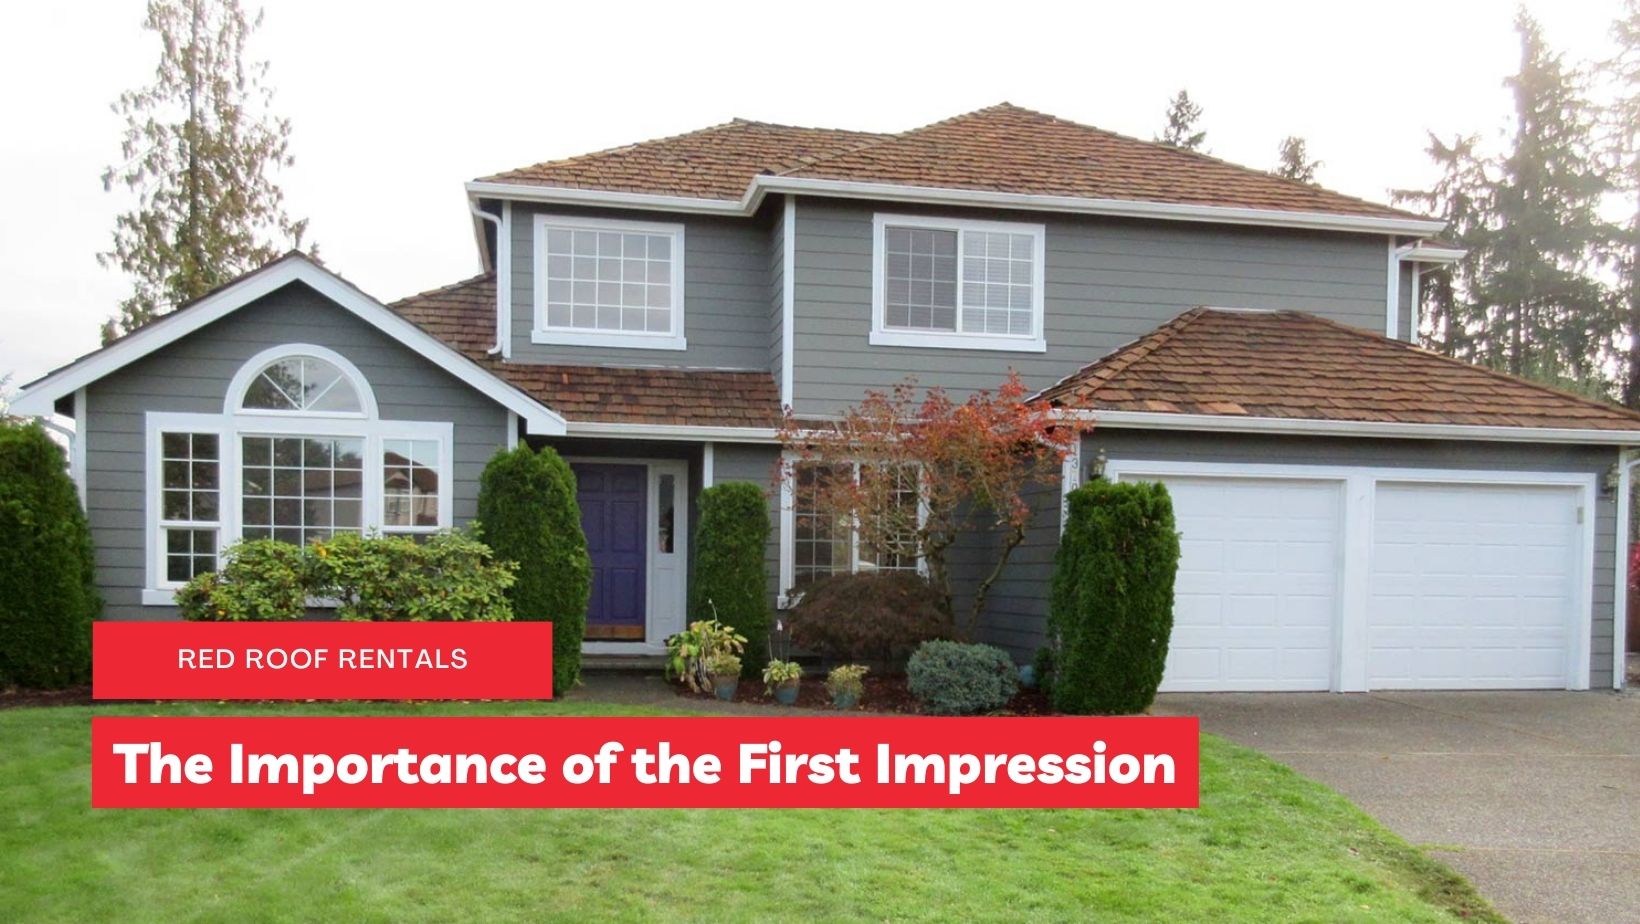 The Importance of the First Impression